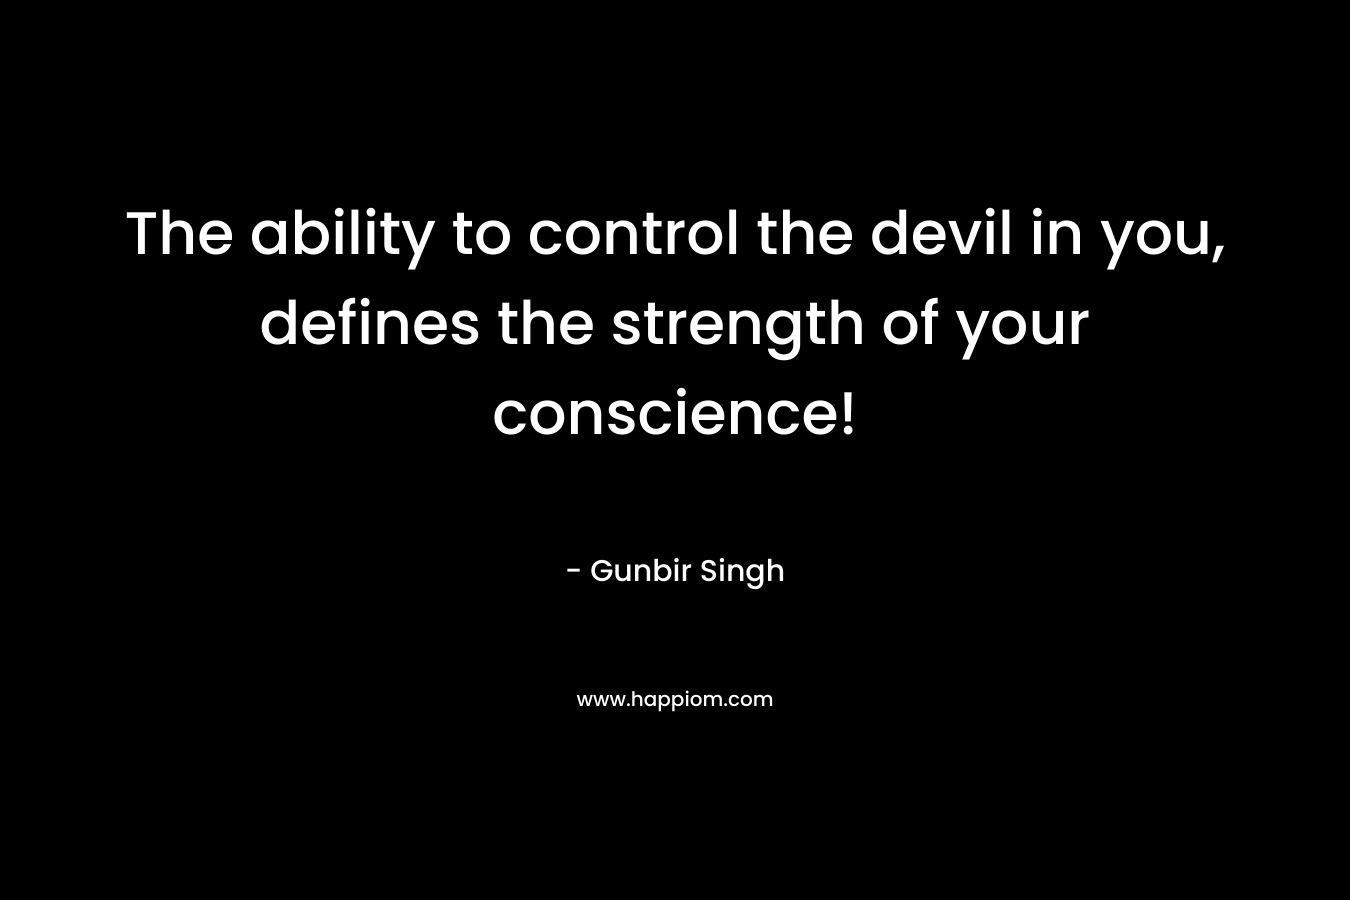 The ability to control the devil in you, defines the strength of your conscience!